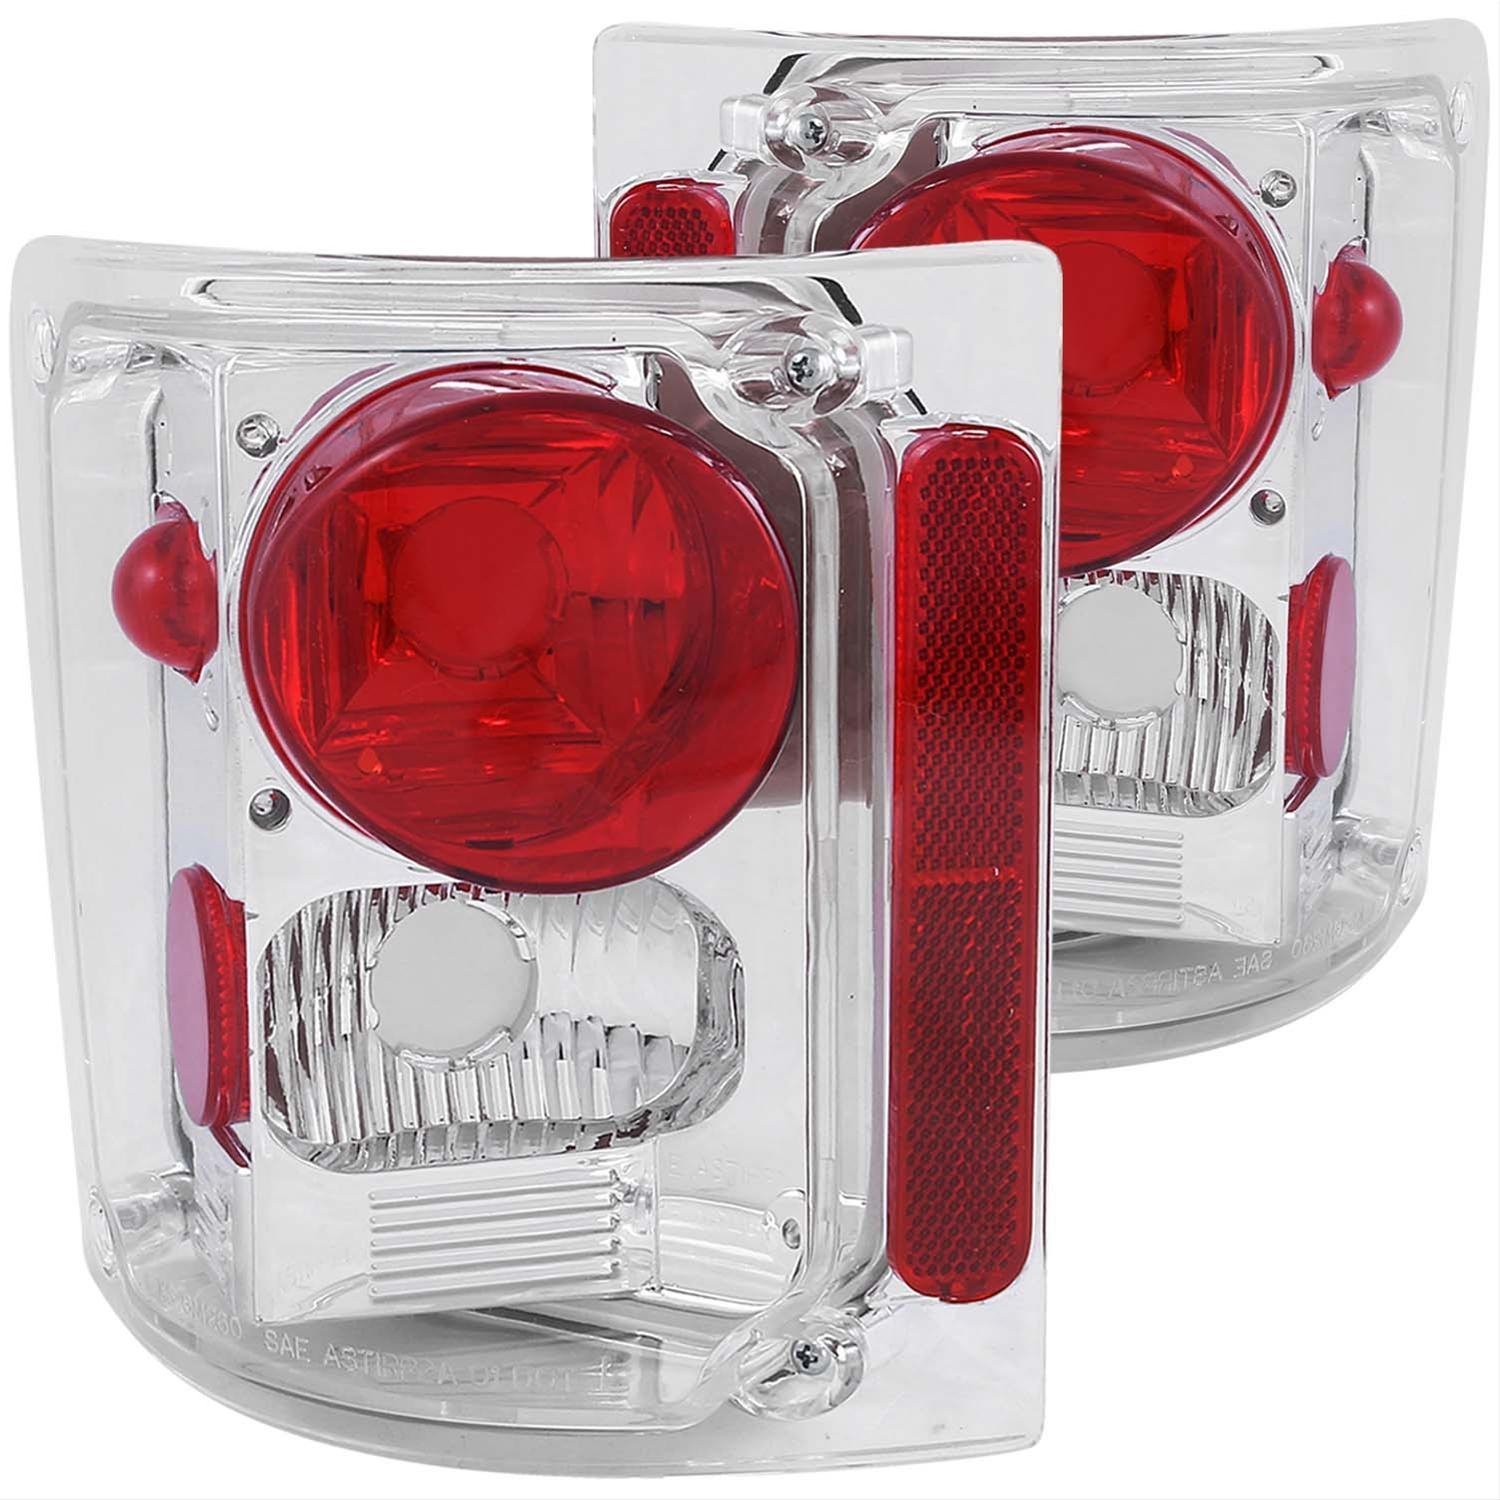 1973-1987 Chevy/GMC Full-Size Truck/SUV Taillights